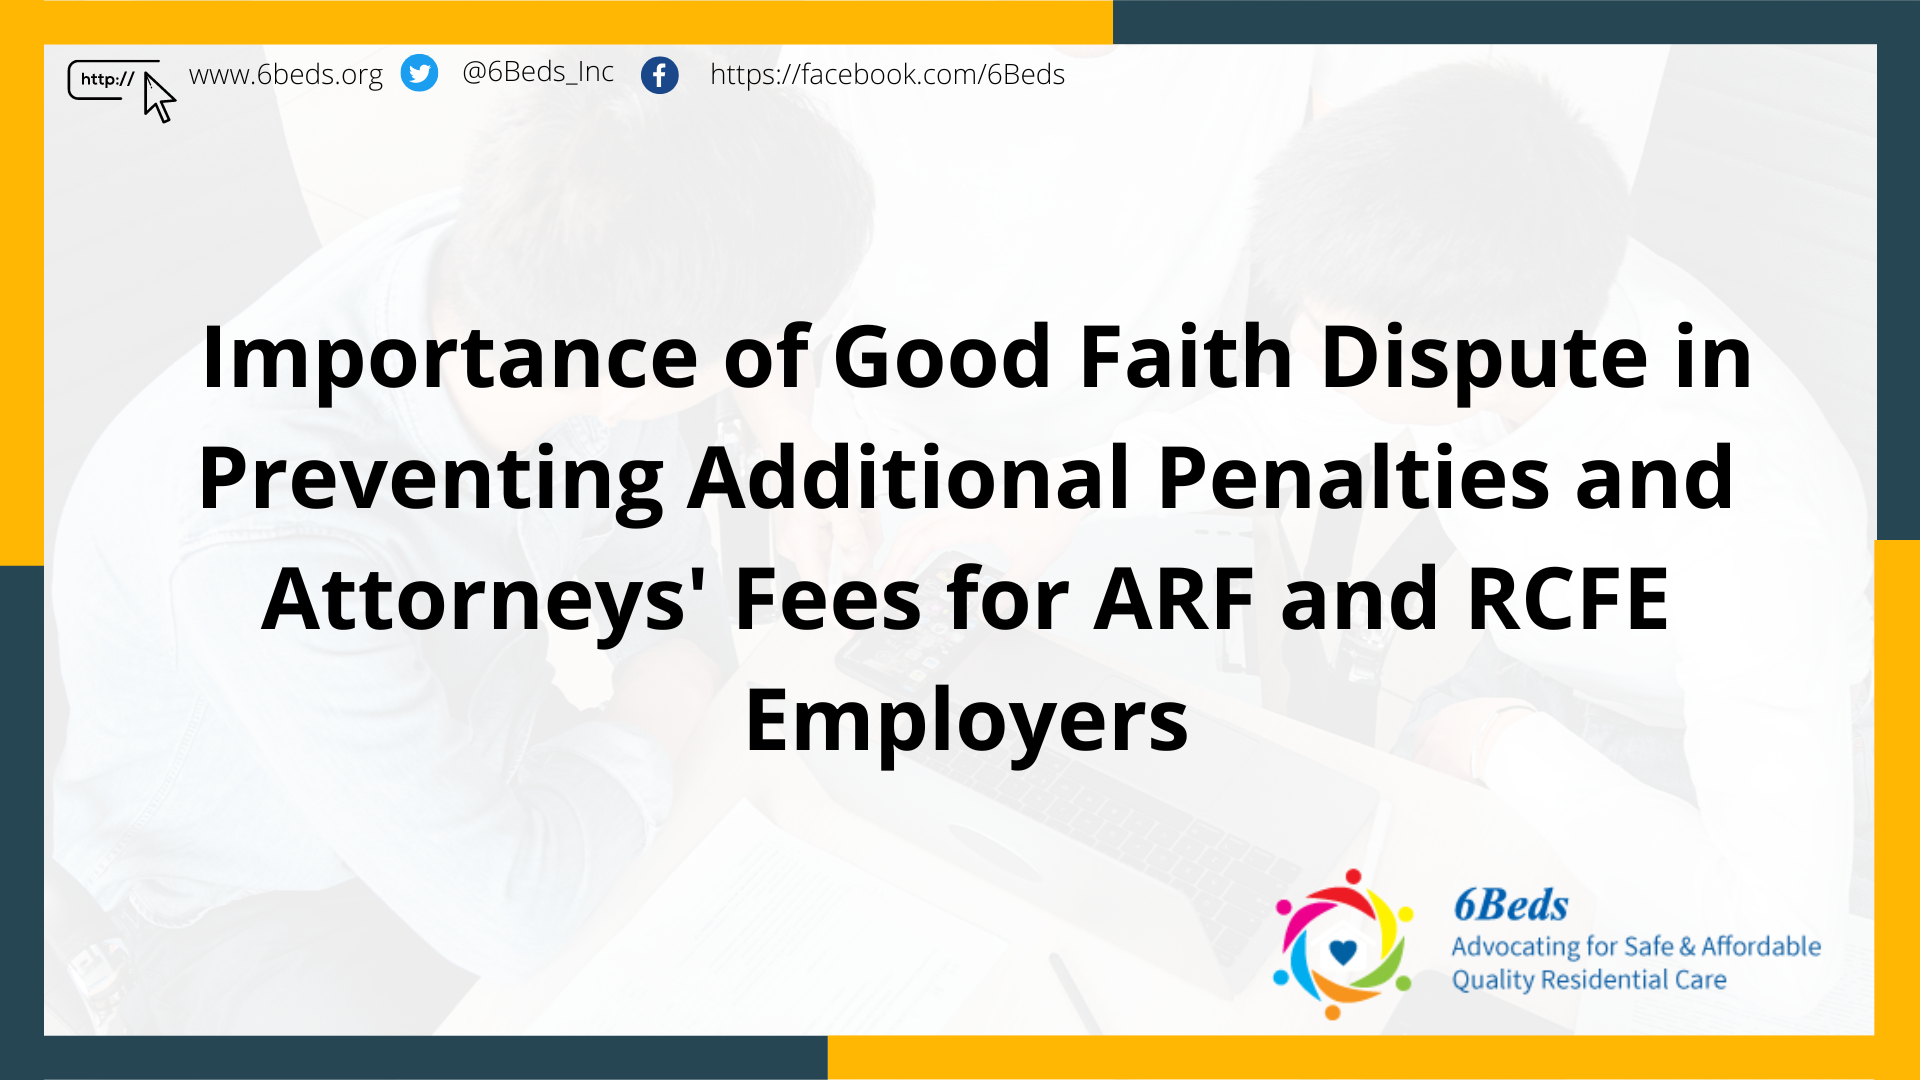 Importance of Good Faith Dispute in Preventing Additional Penalties and Attorneys' Fees for ARF and RCFE Employers